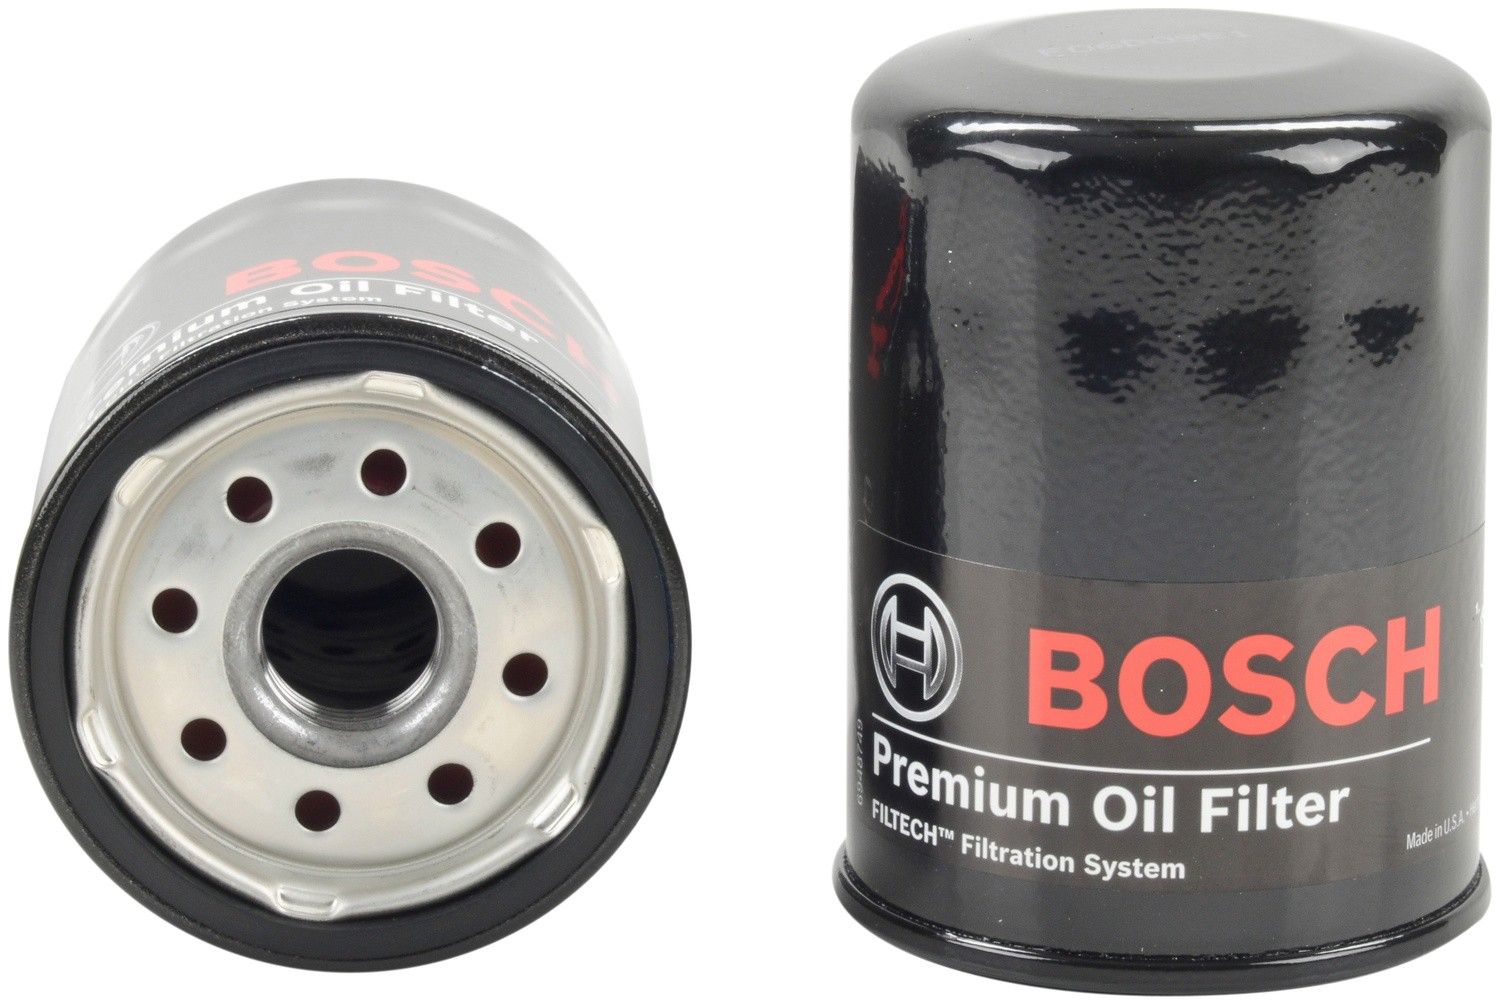 2009 toyota camry oil filter